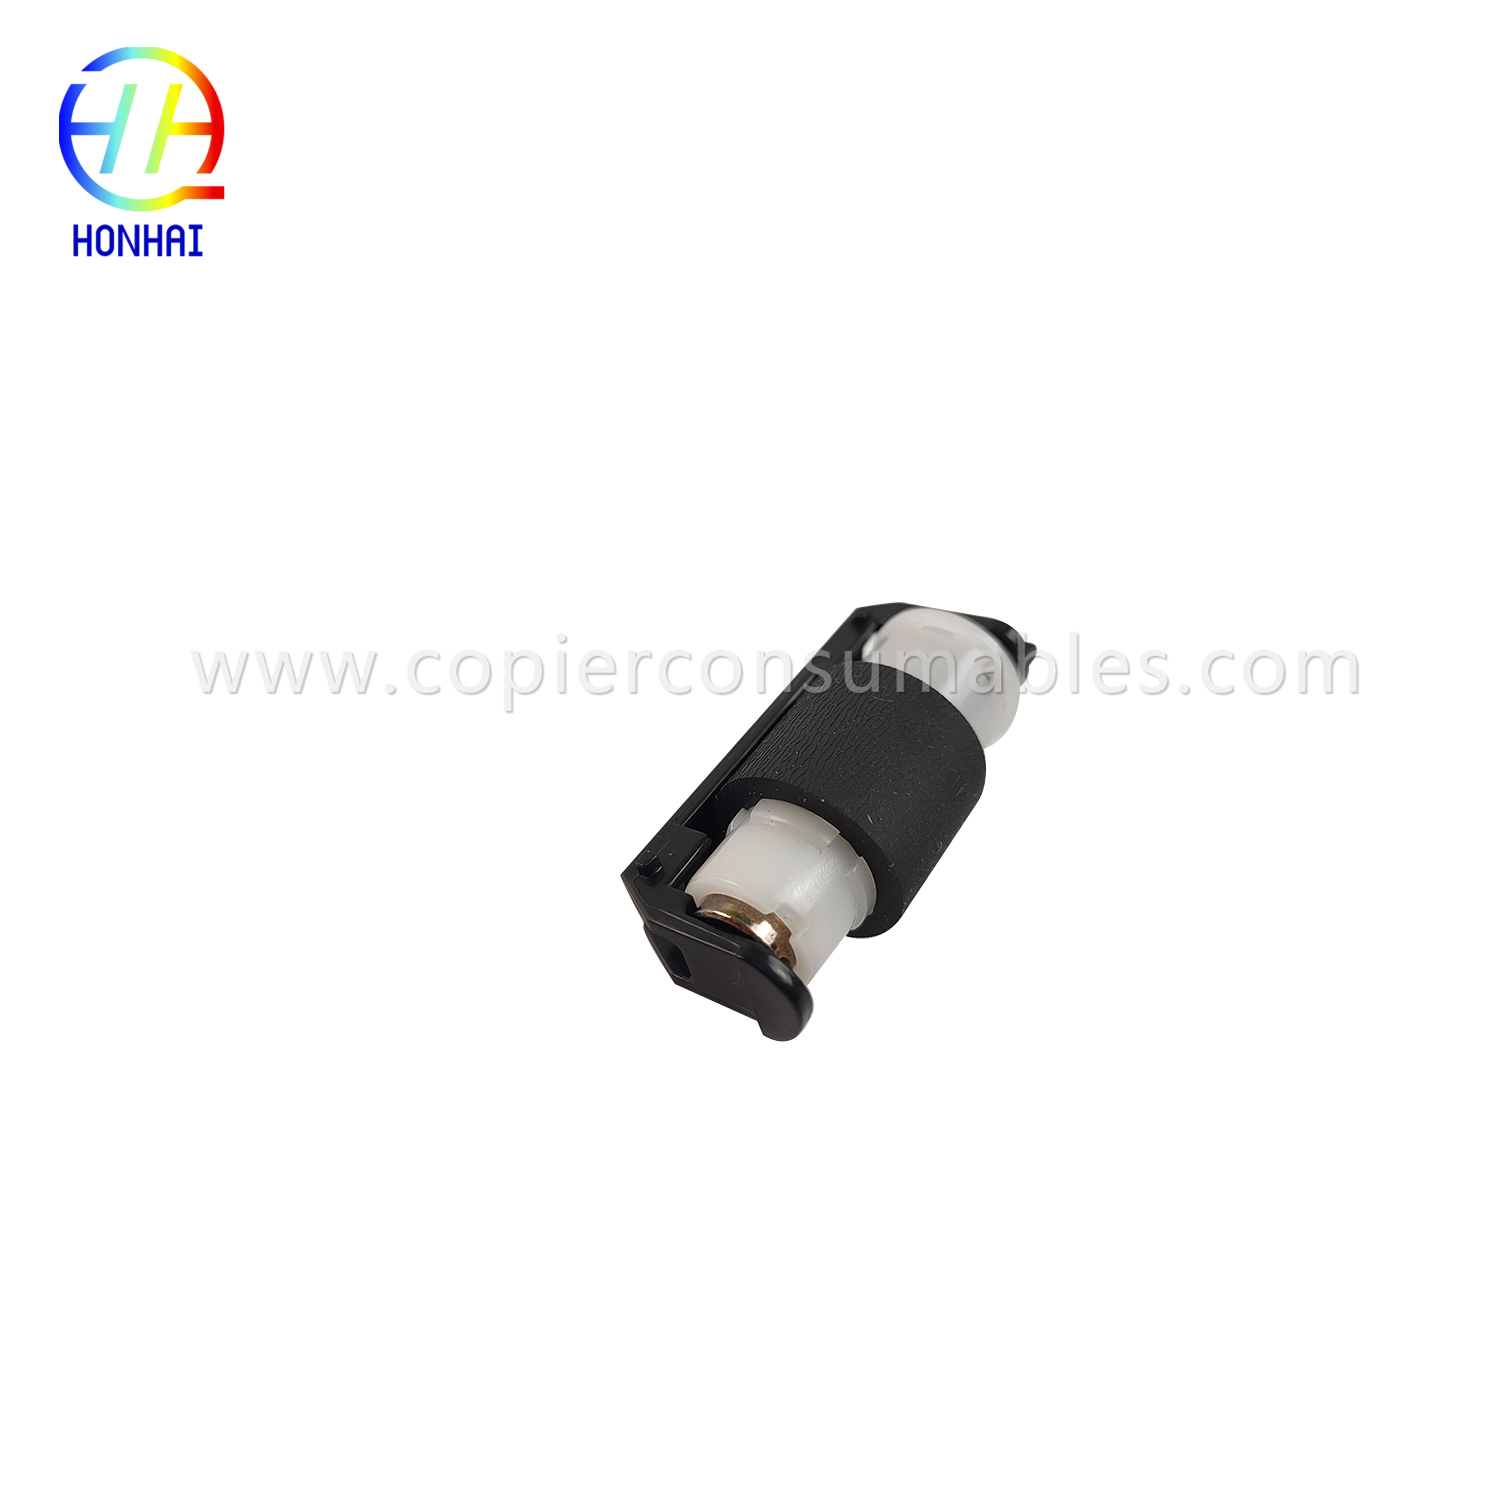 Separation Roller Assembly for HP CM1312 CM2320 CP2025 CP1215 CP1515 CP1518 CM1415 CP1525 RM14425000CN RM1-4425-000CN OEM